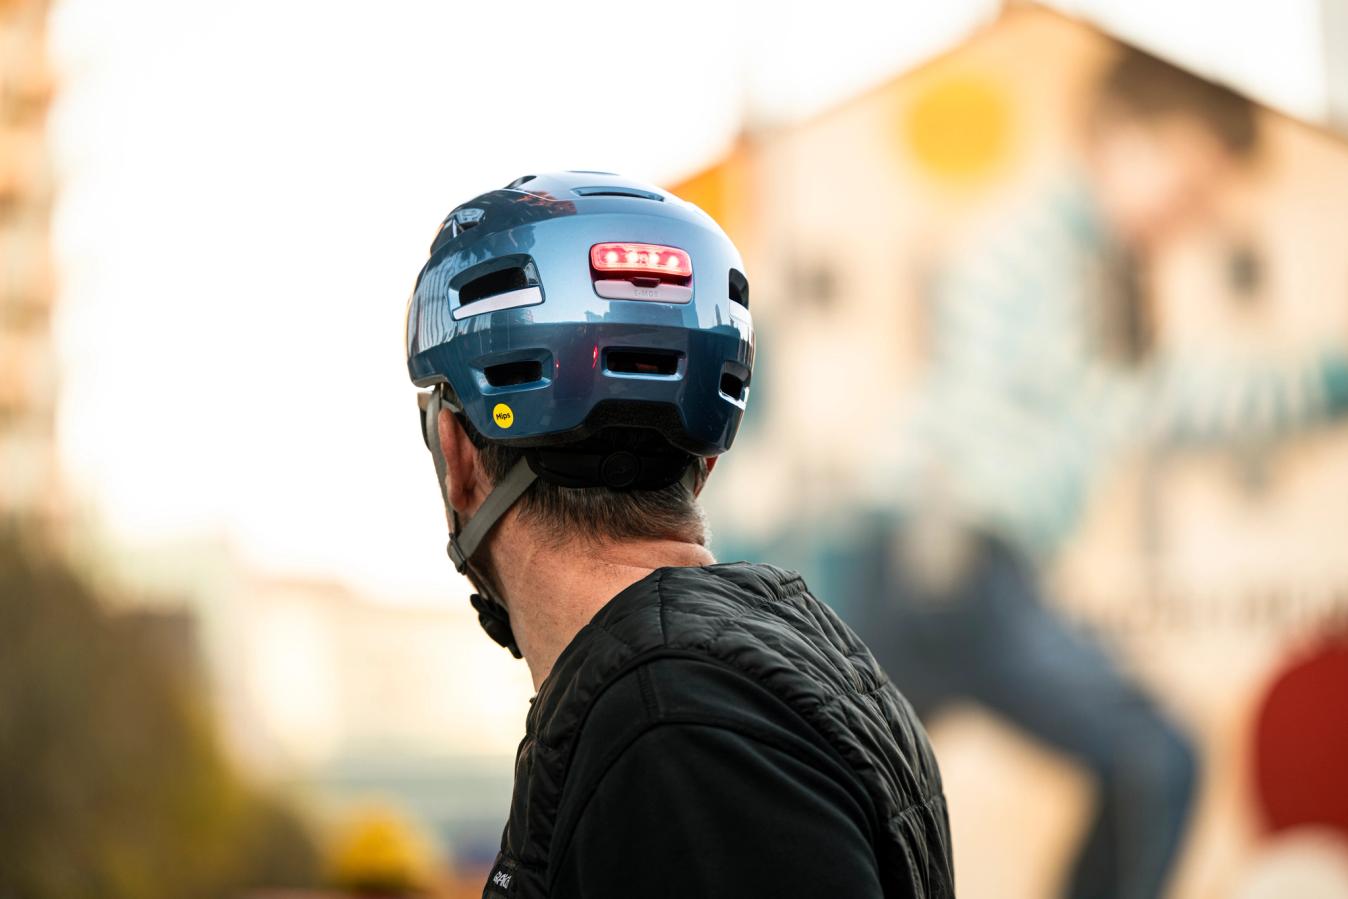 The helmet features an integrated USB rechargeable rear light